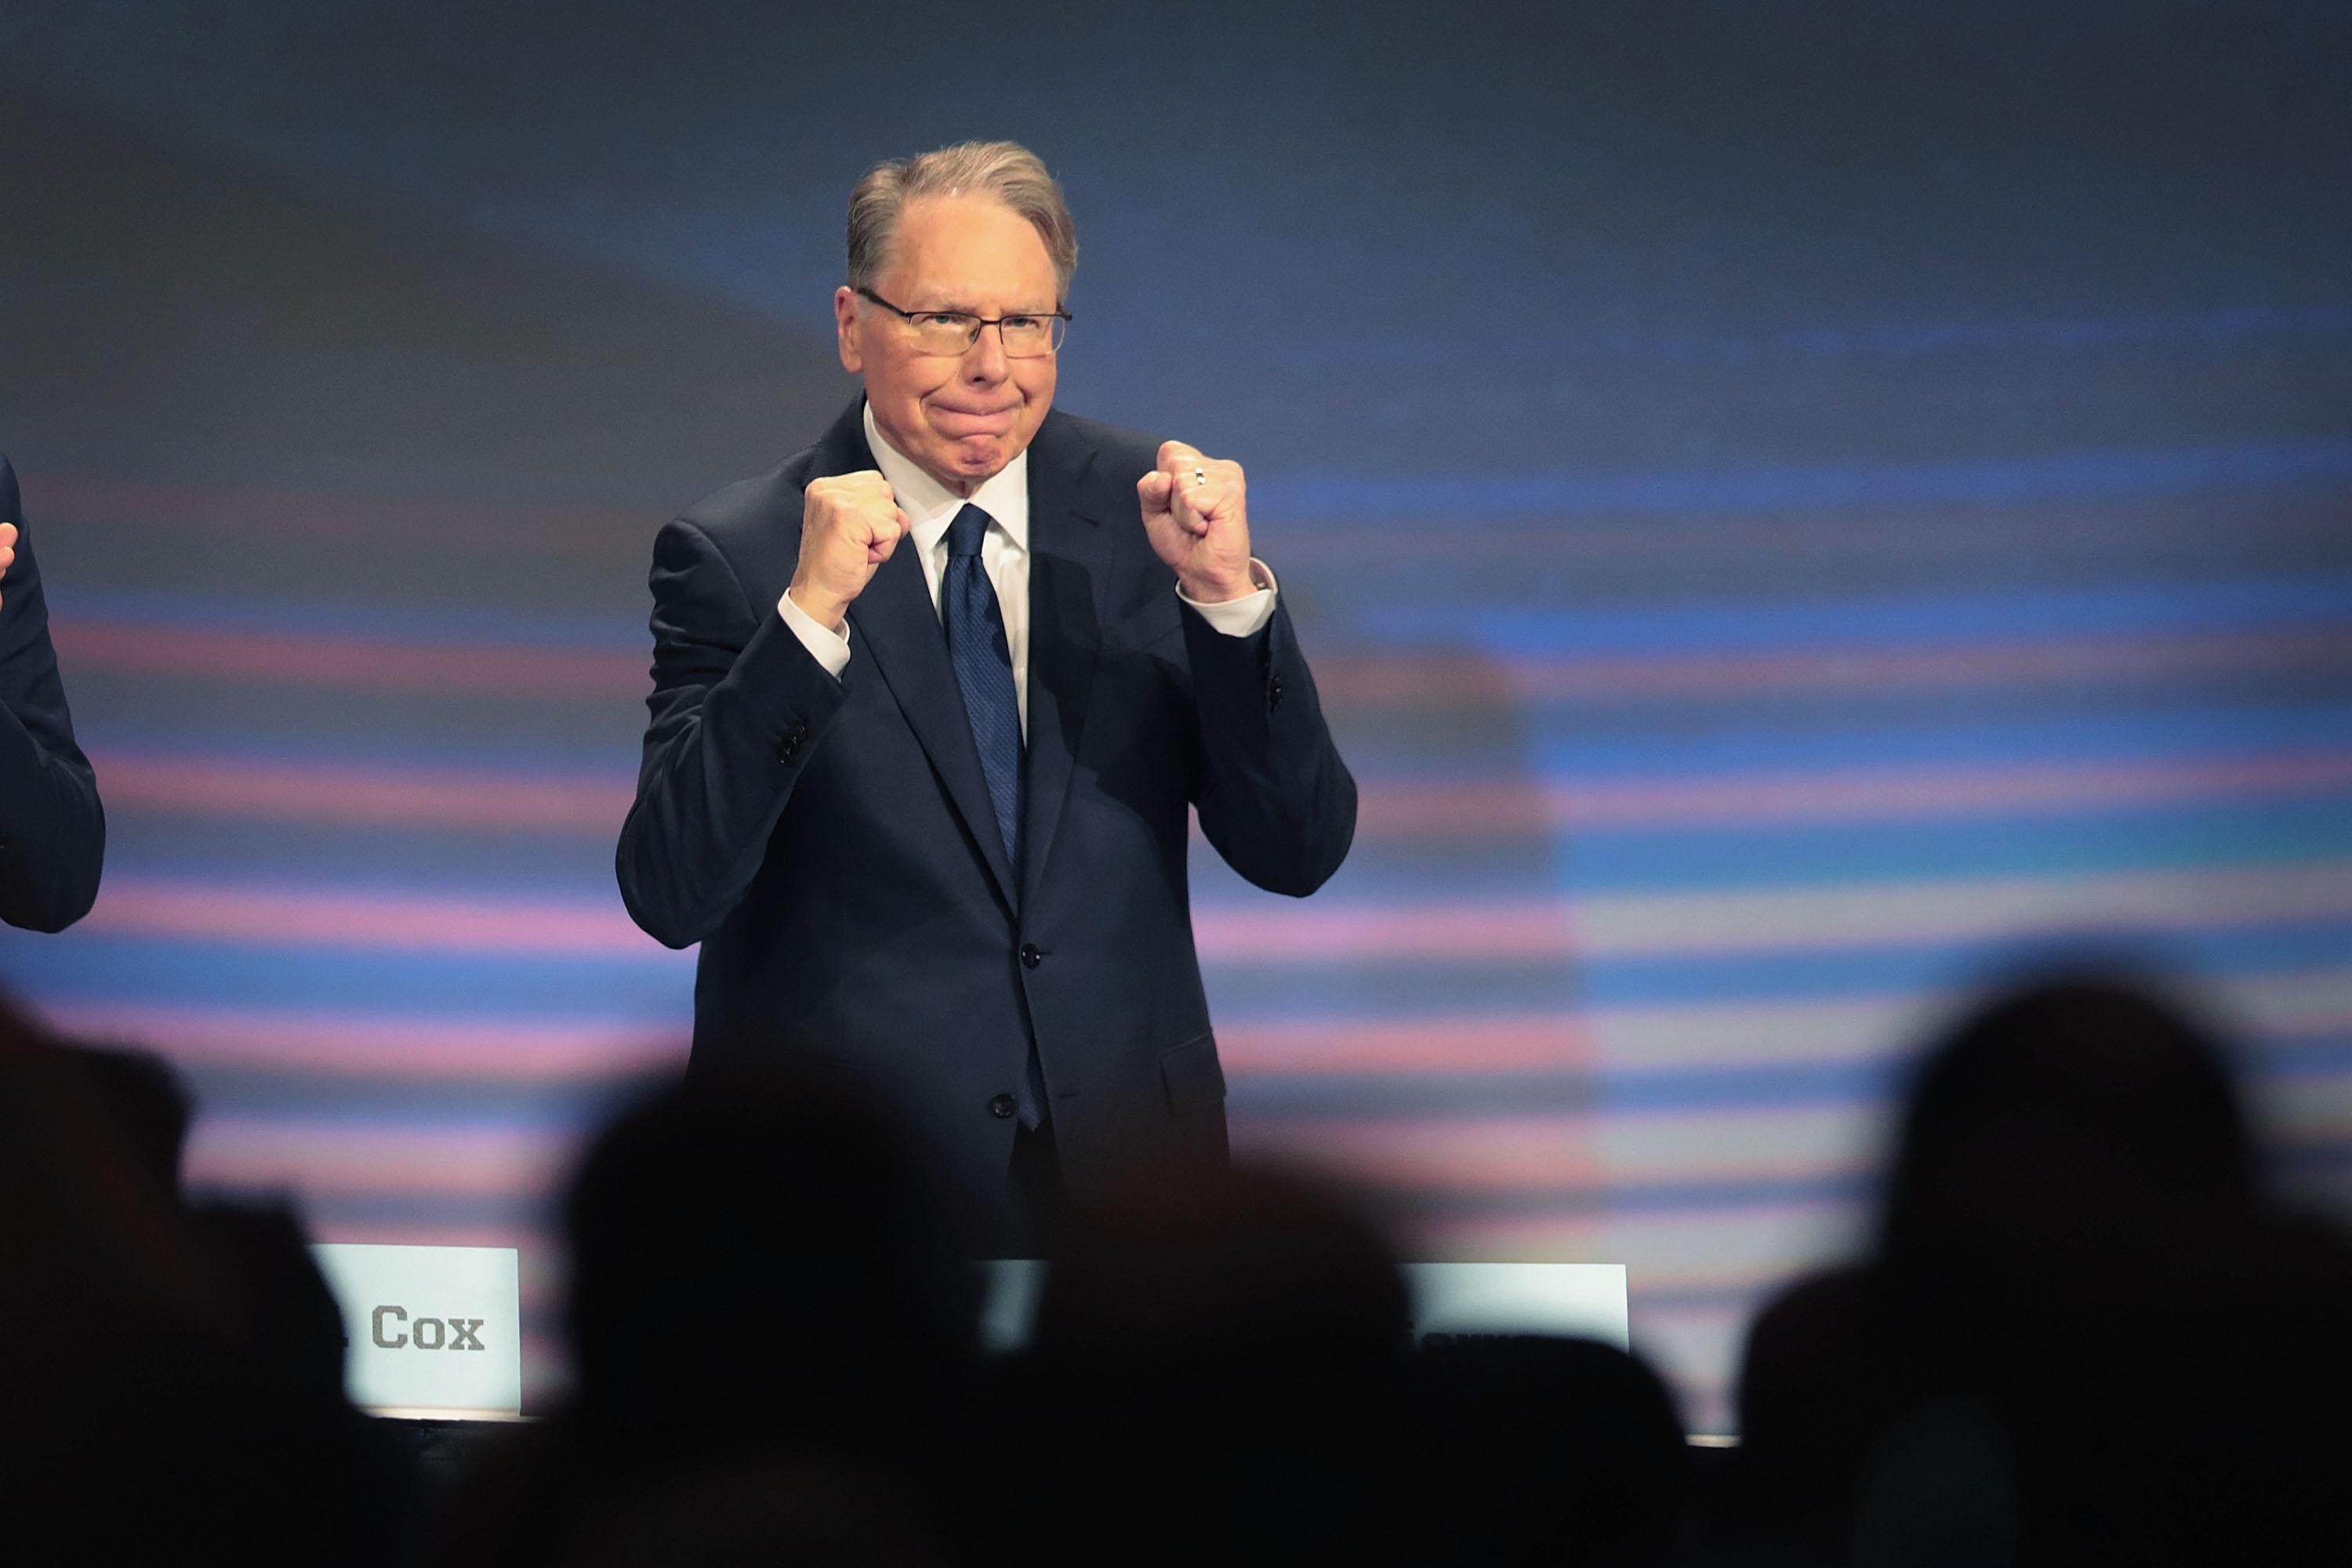 Wayne LaPierre speaks at an NRA event.